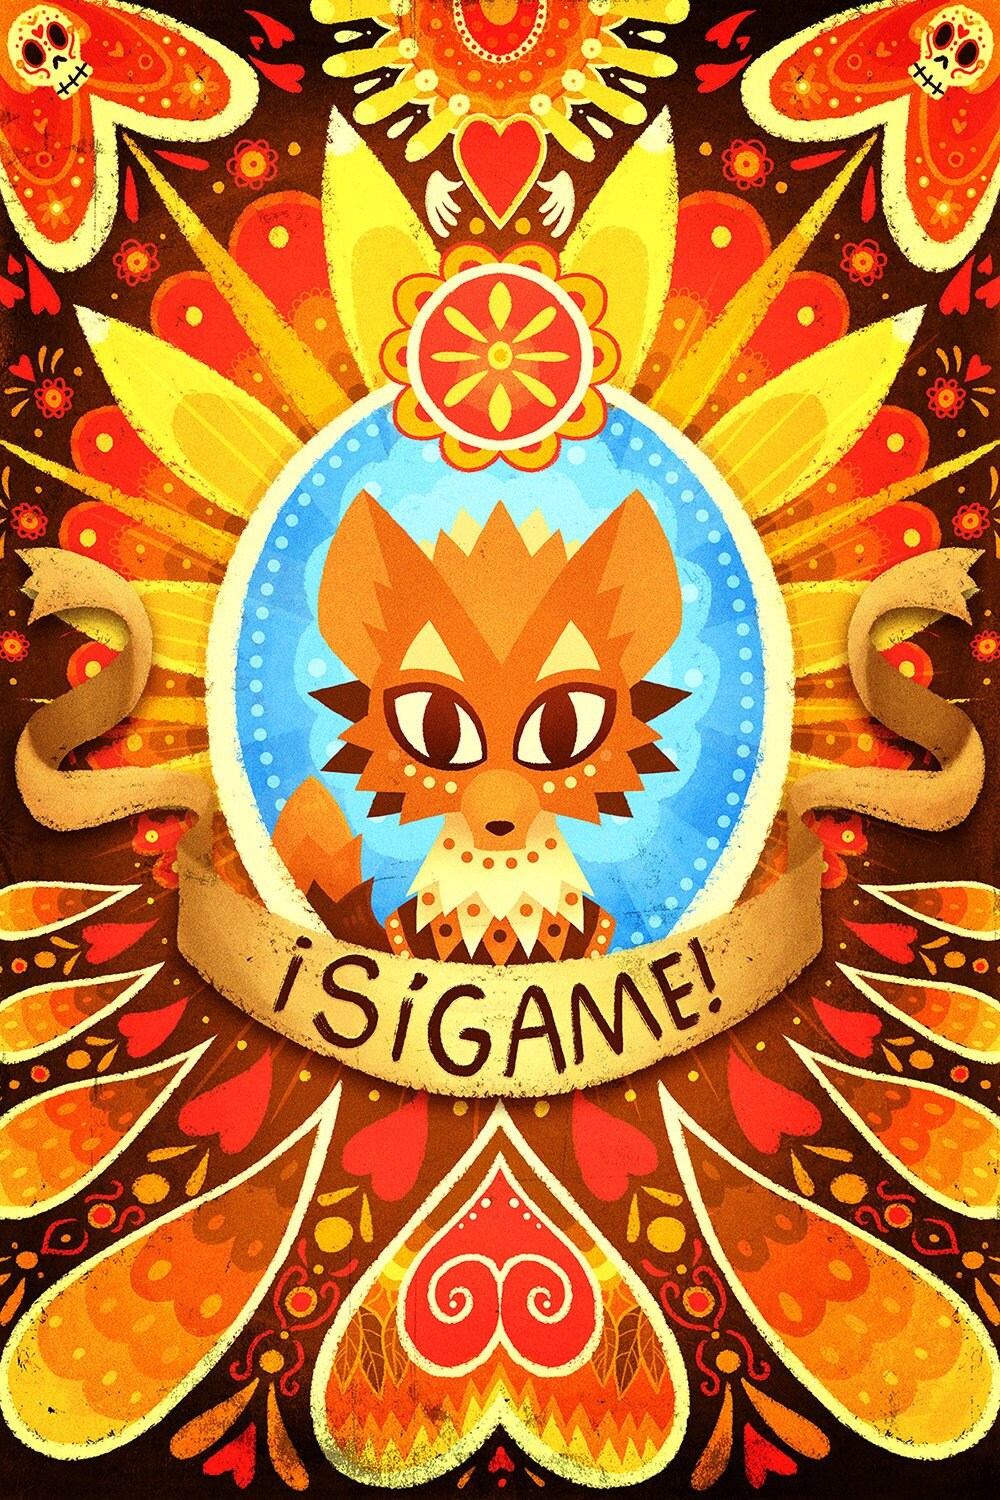 Sigame! (13"x19" Print)